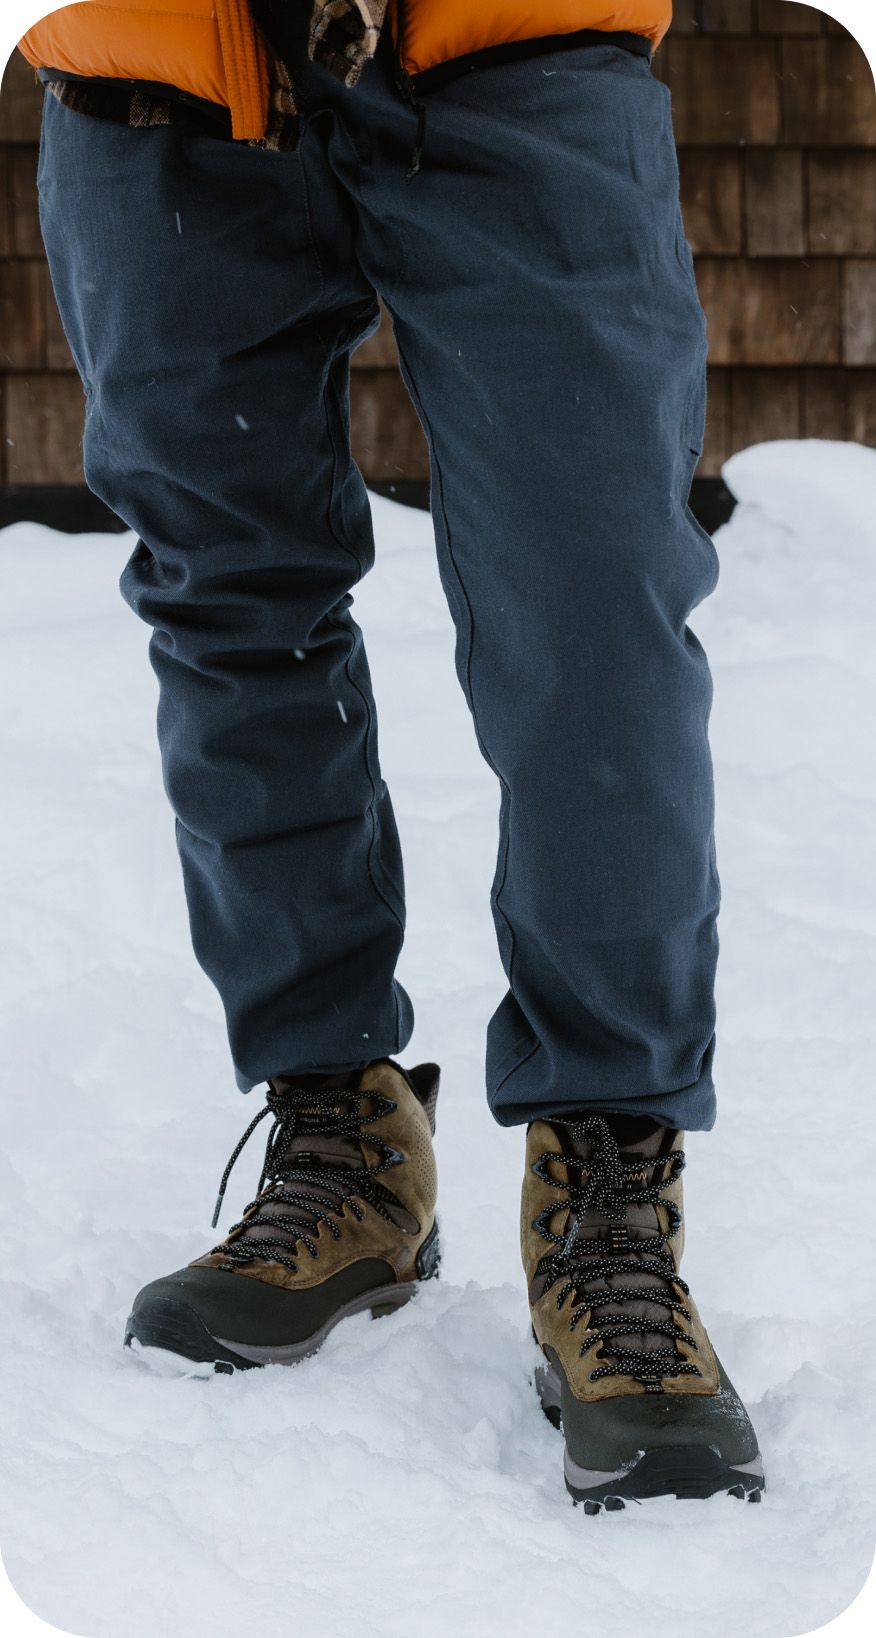 Legs wearing jeans in boots standing in snow